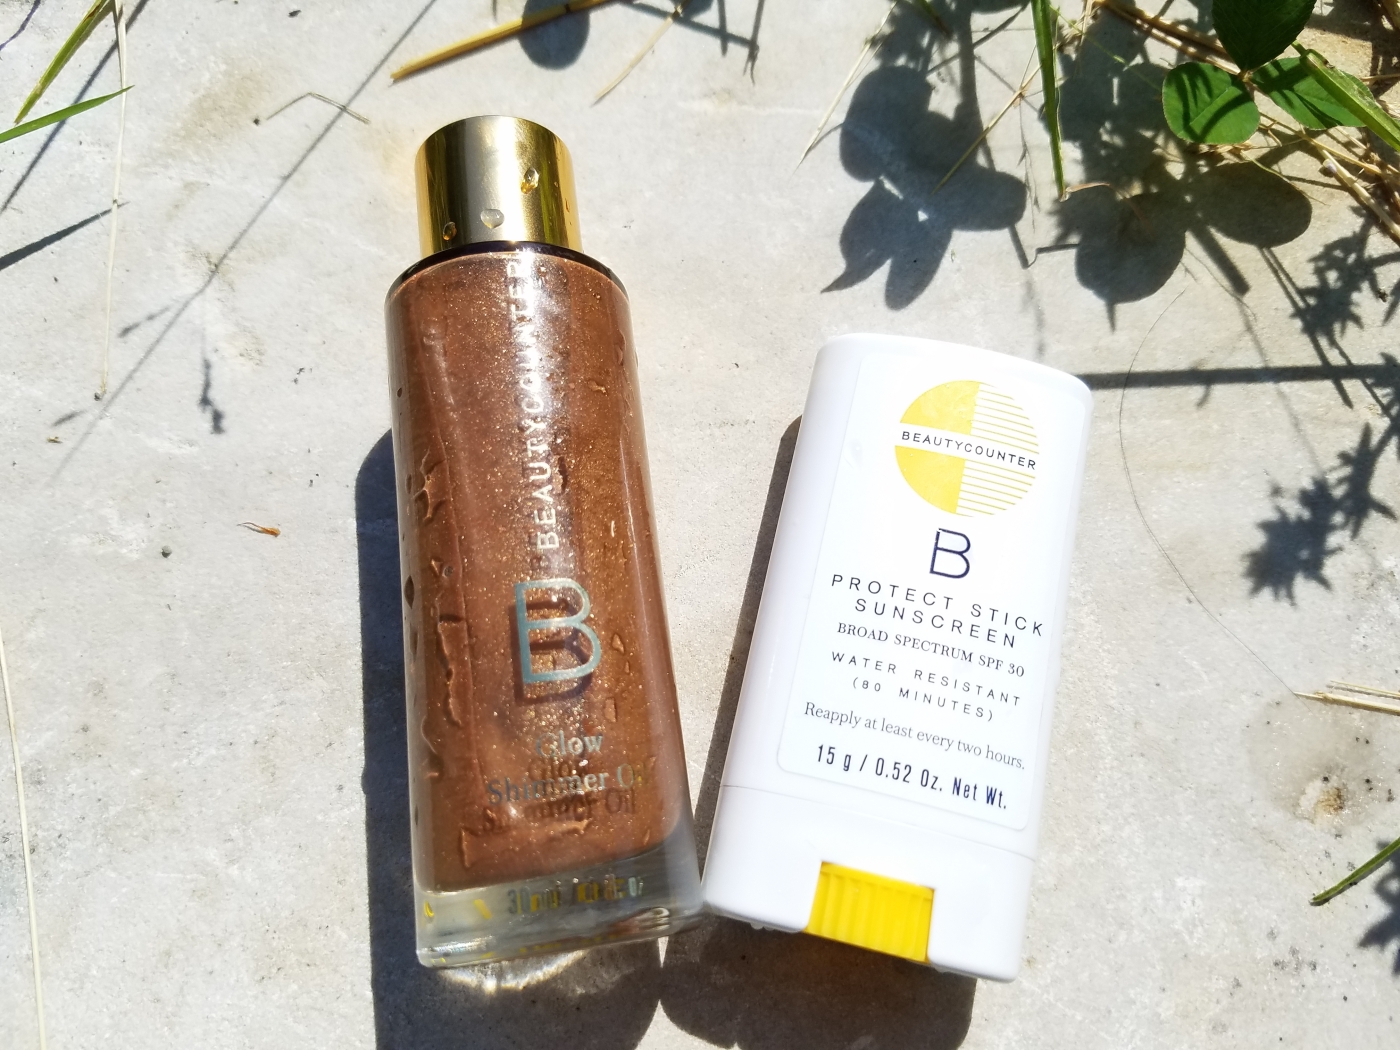 Better Beauty Vermont Glow Shimmer Oil travel size and small Protect Stick Sunscreen